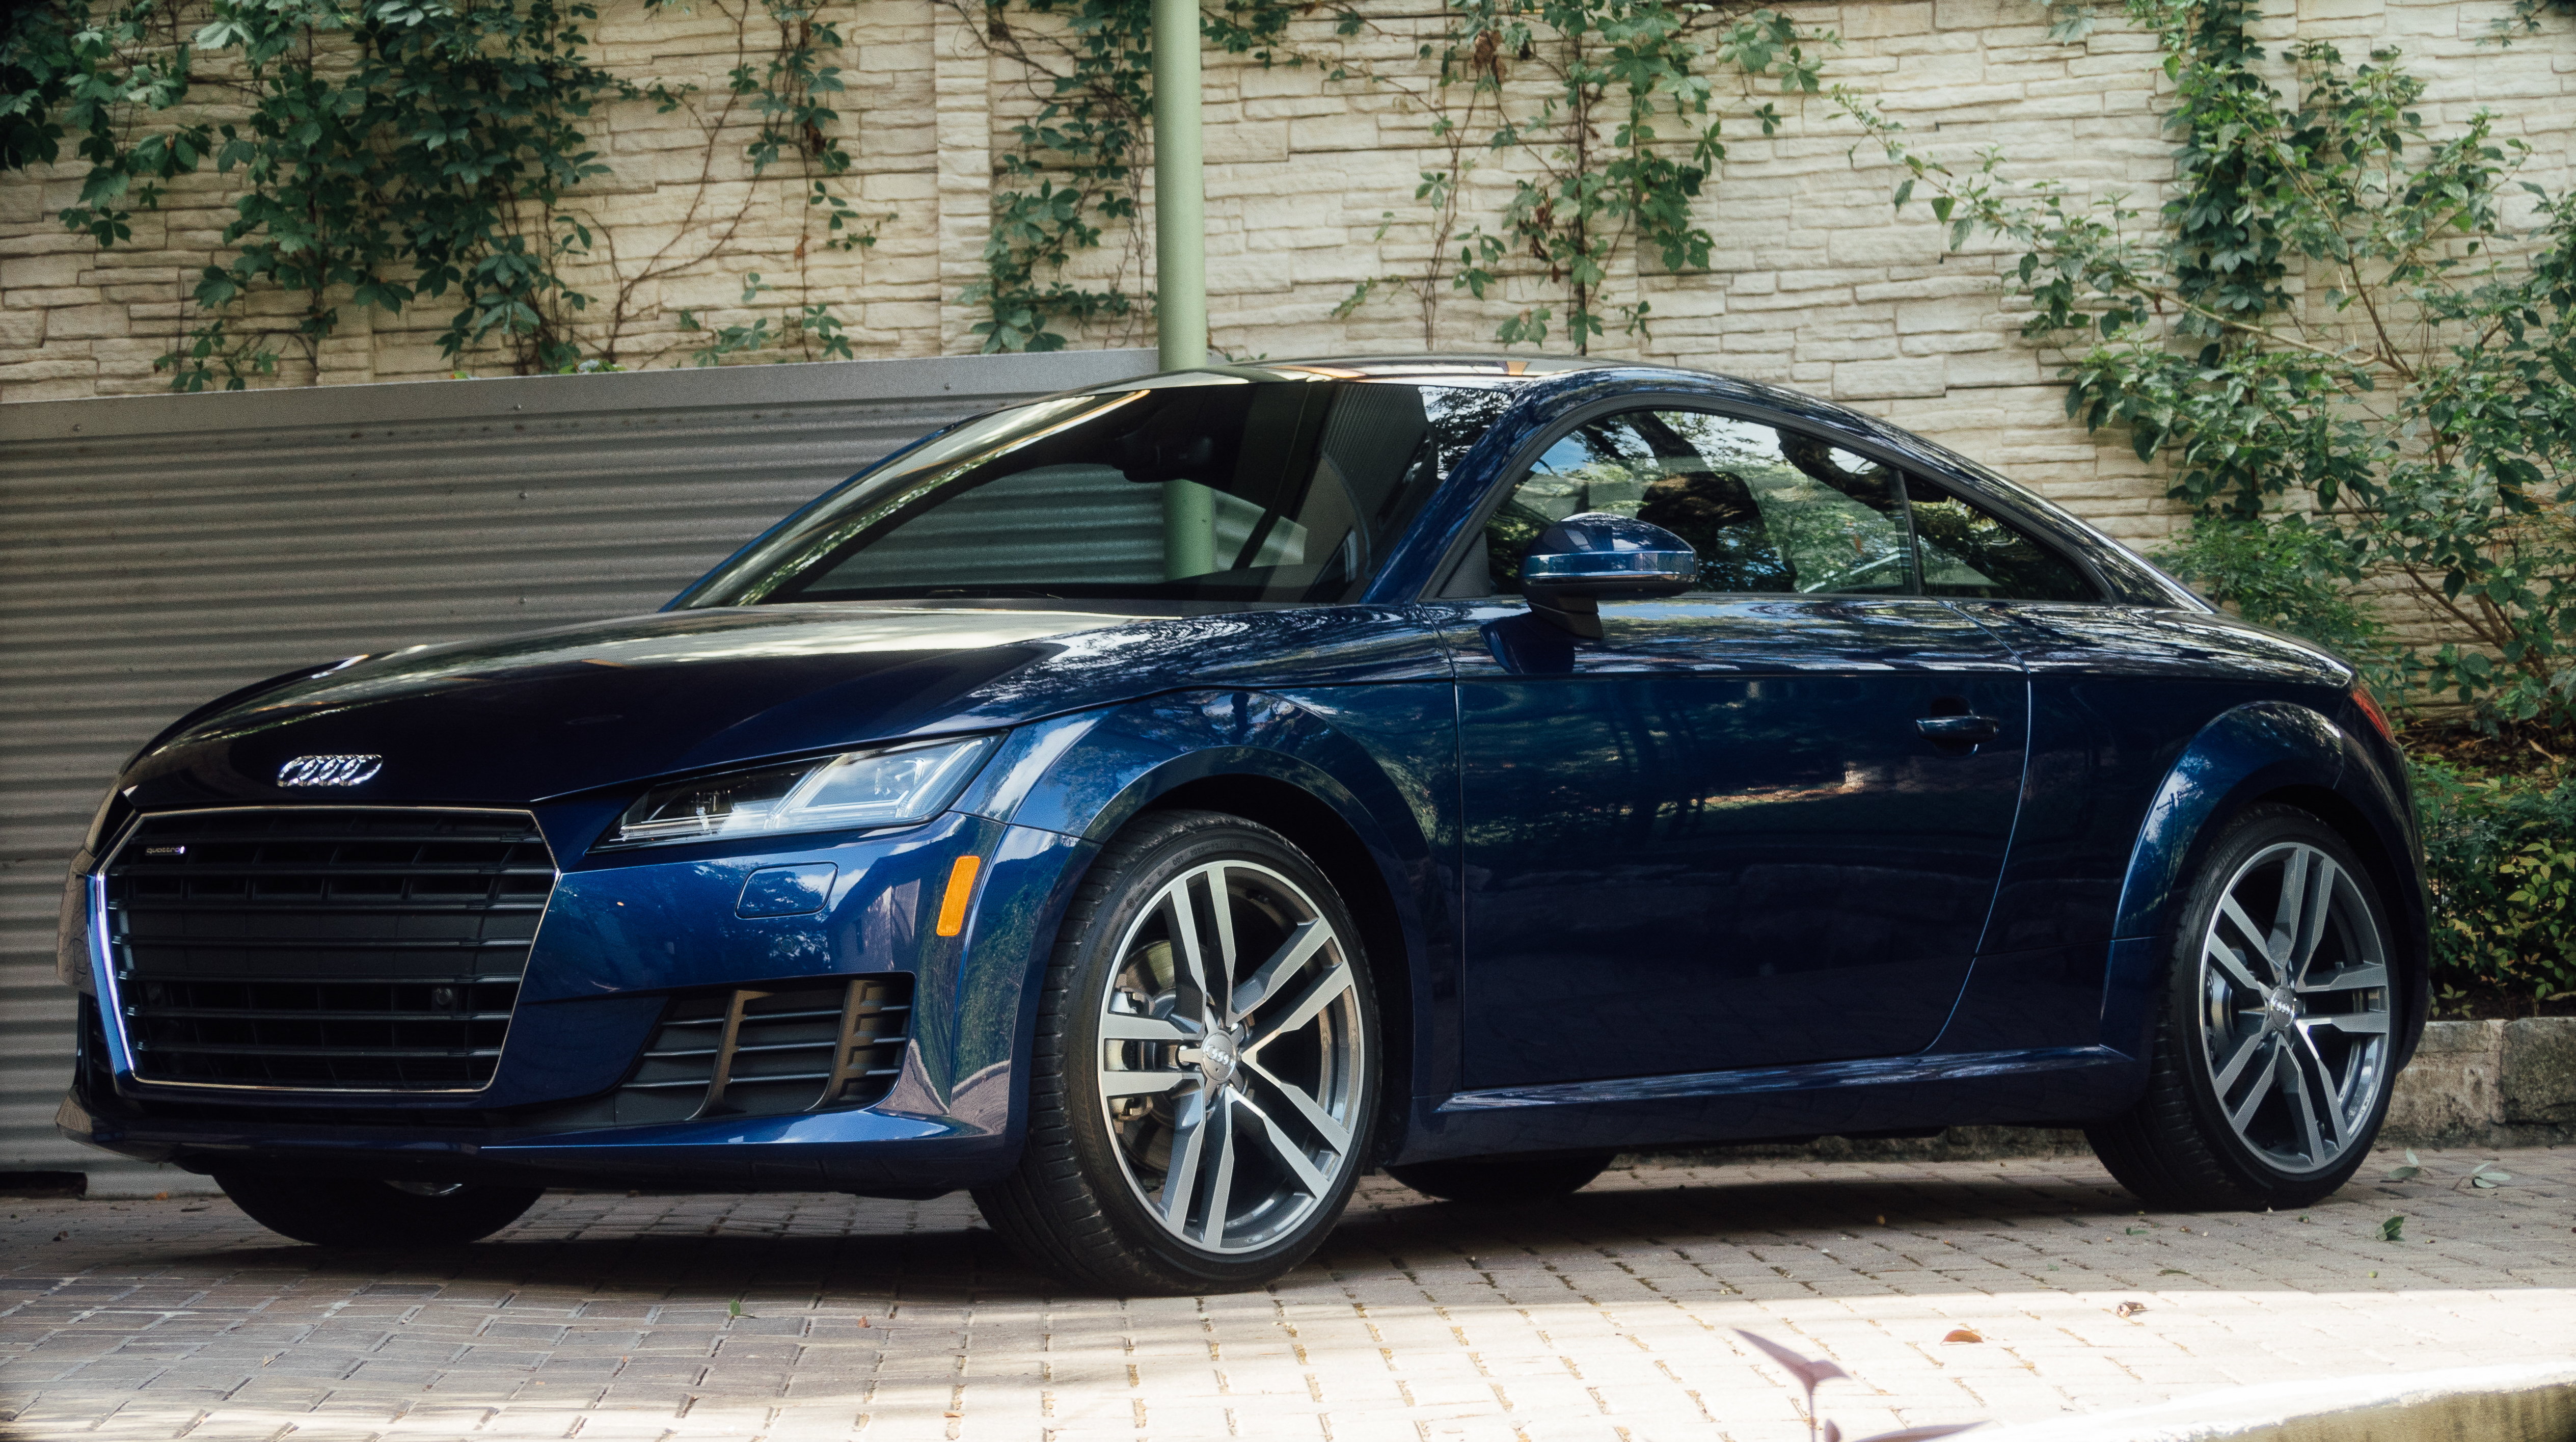 A retina display for the road: The clever new 2016 Audi TT reviewed